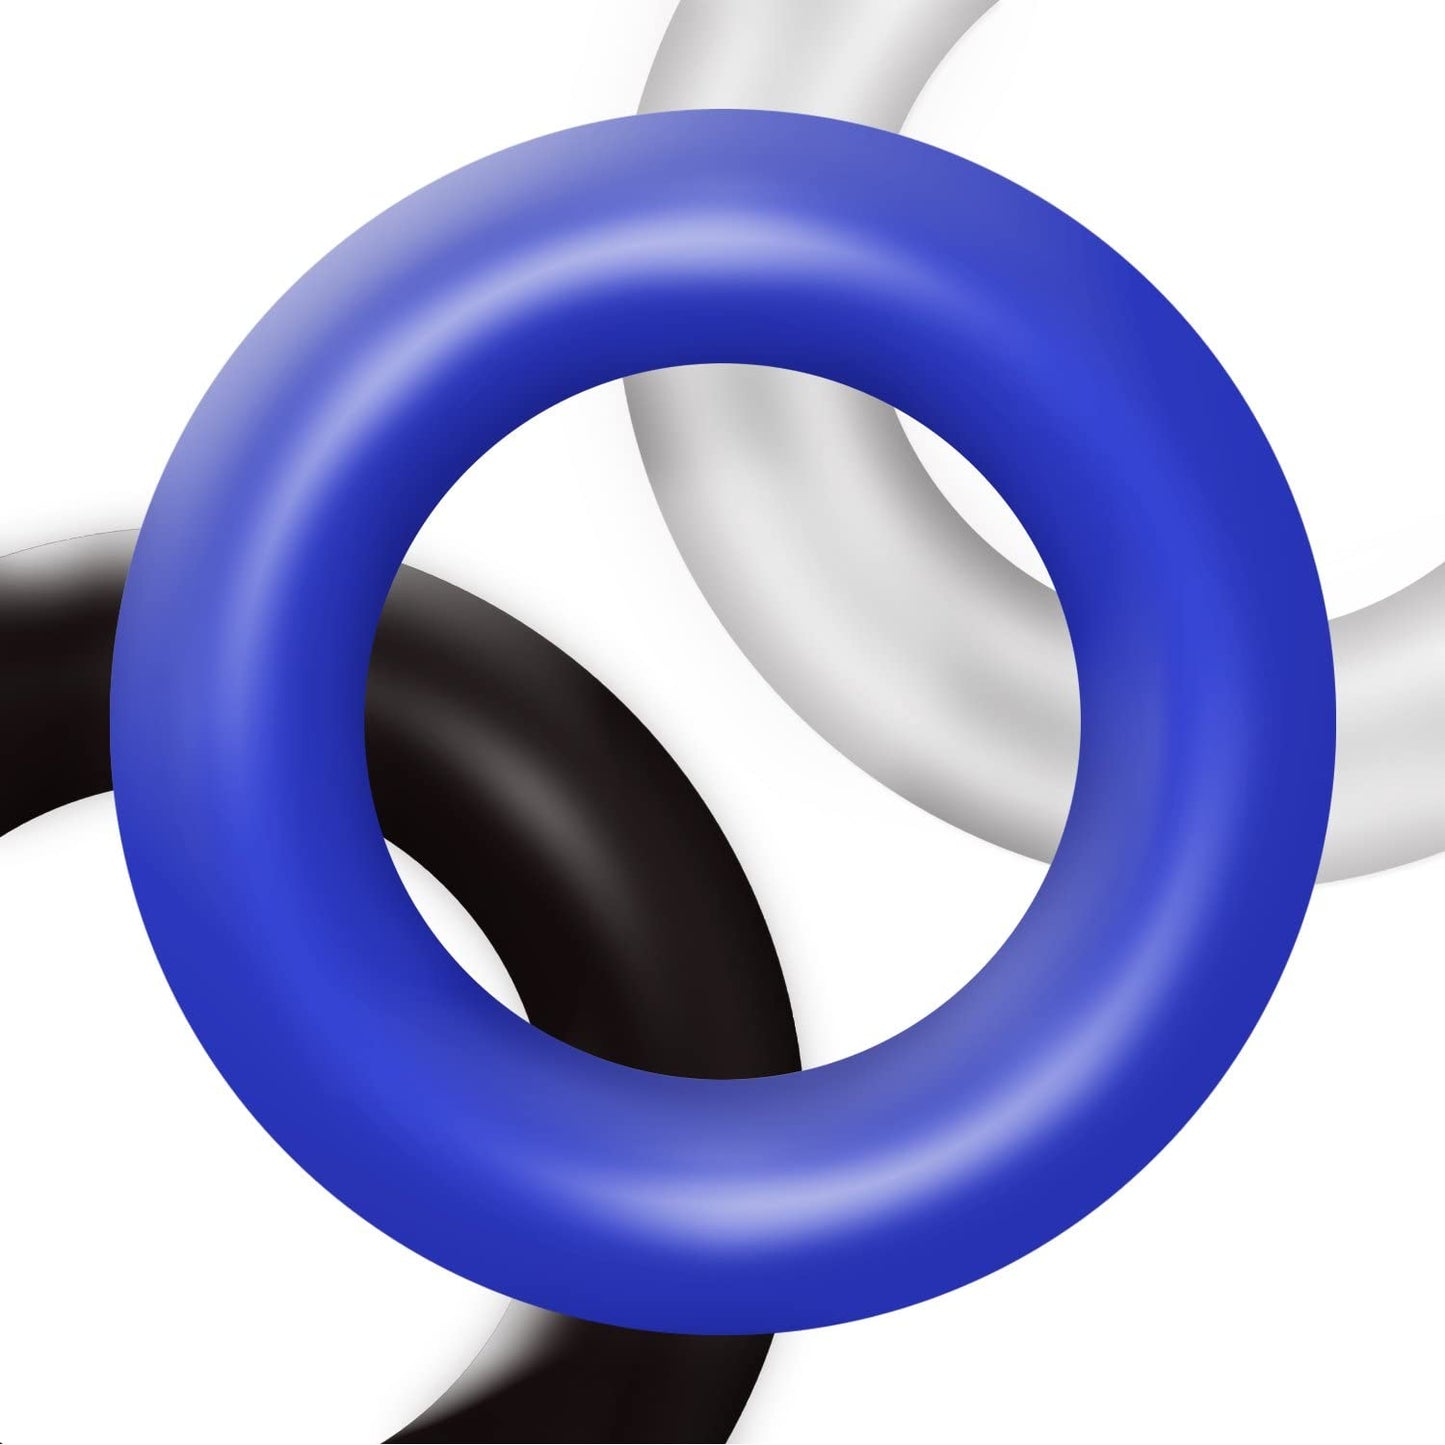 Power Escorts - BR272 - Donut Cockring 3 Pack - Super Stretchable - 3 colors blue /clear /black - attractive colourbox